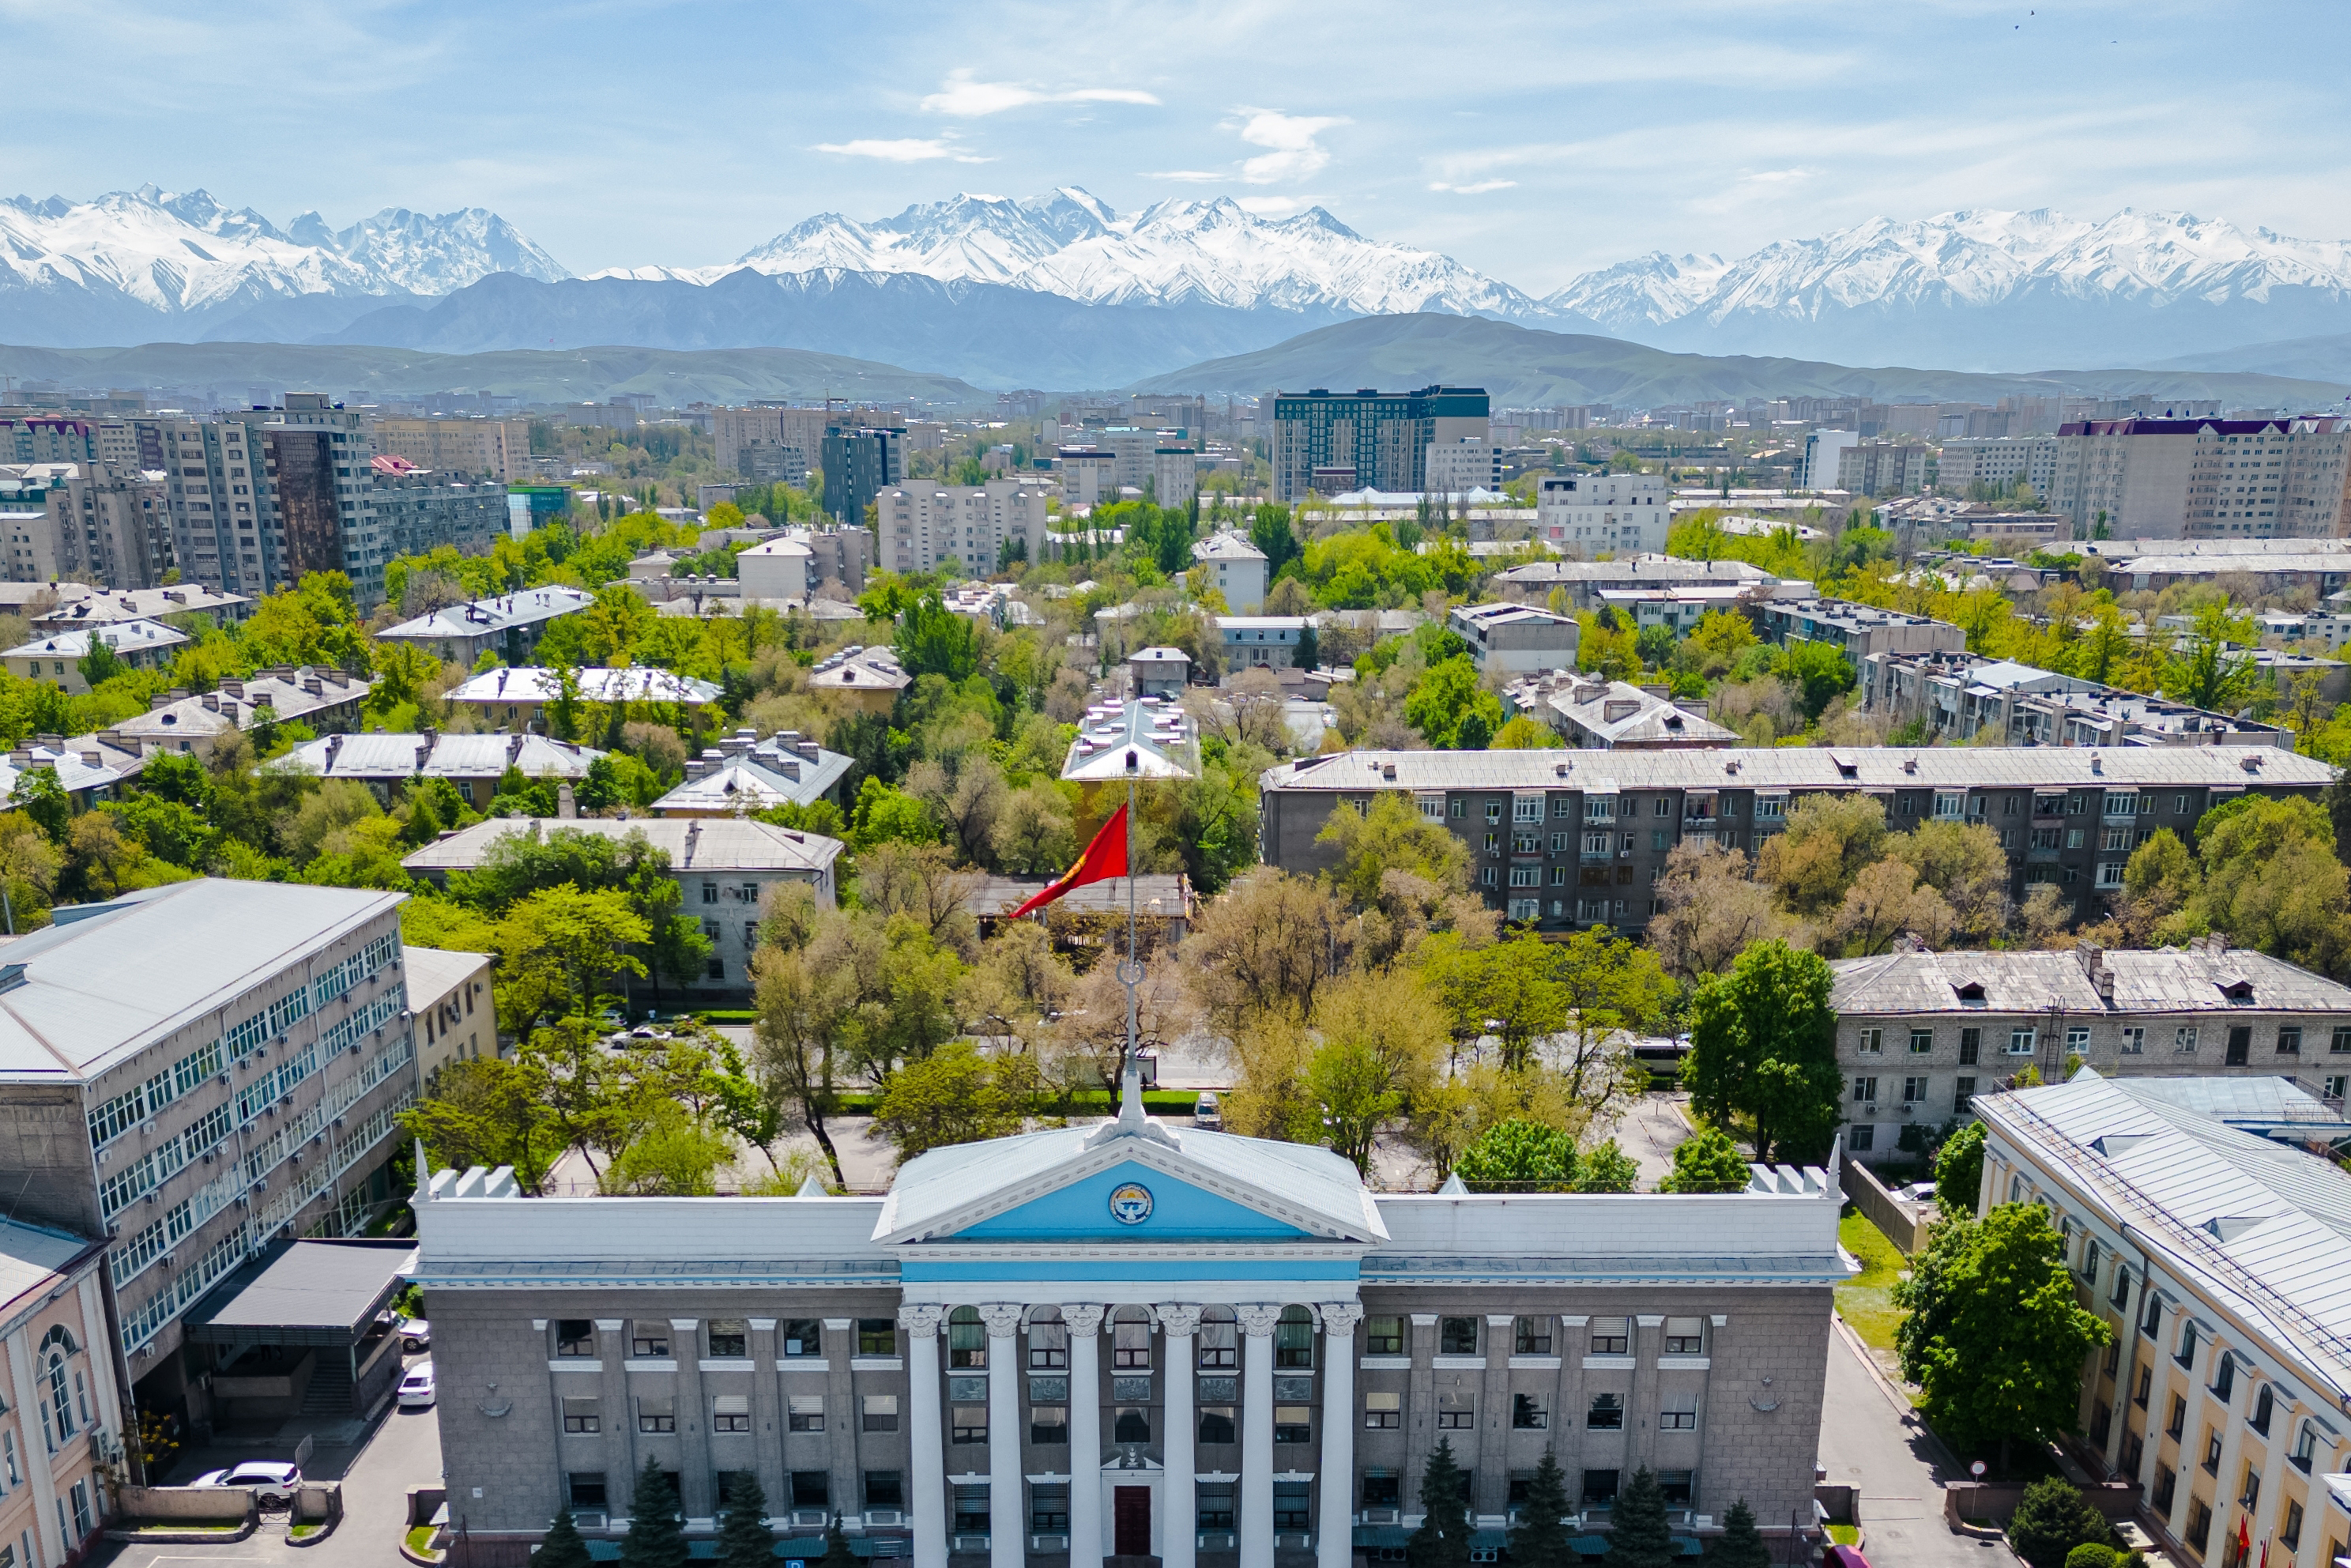 Kyrgyz citizenship allows foreigners to live in a beautiful country